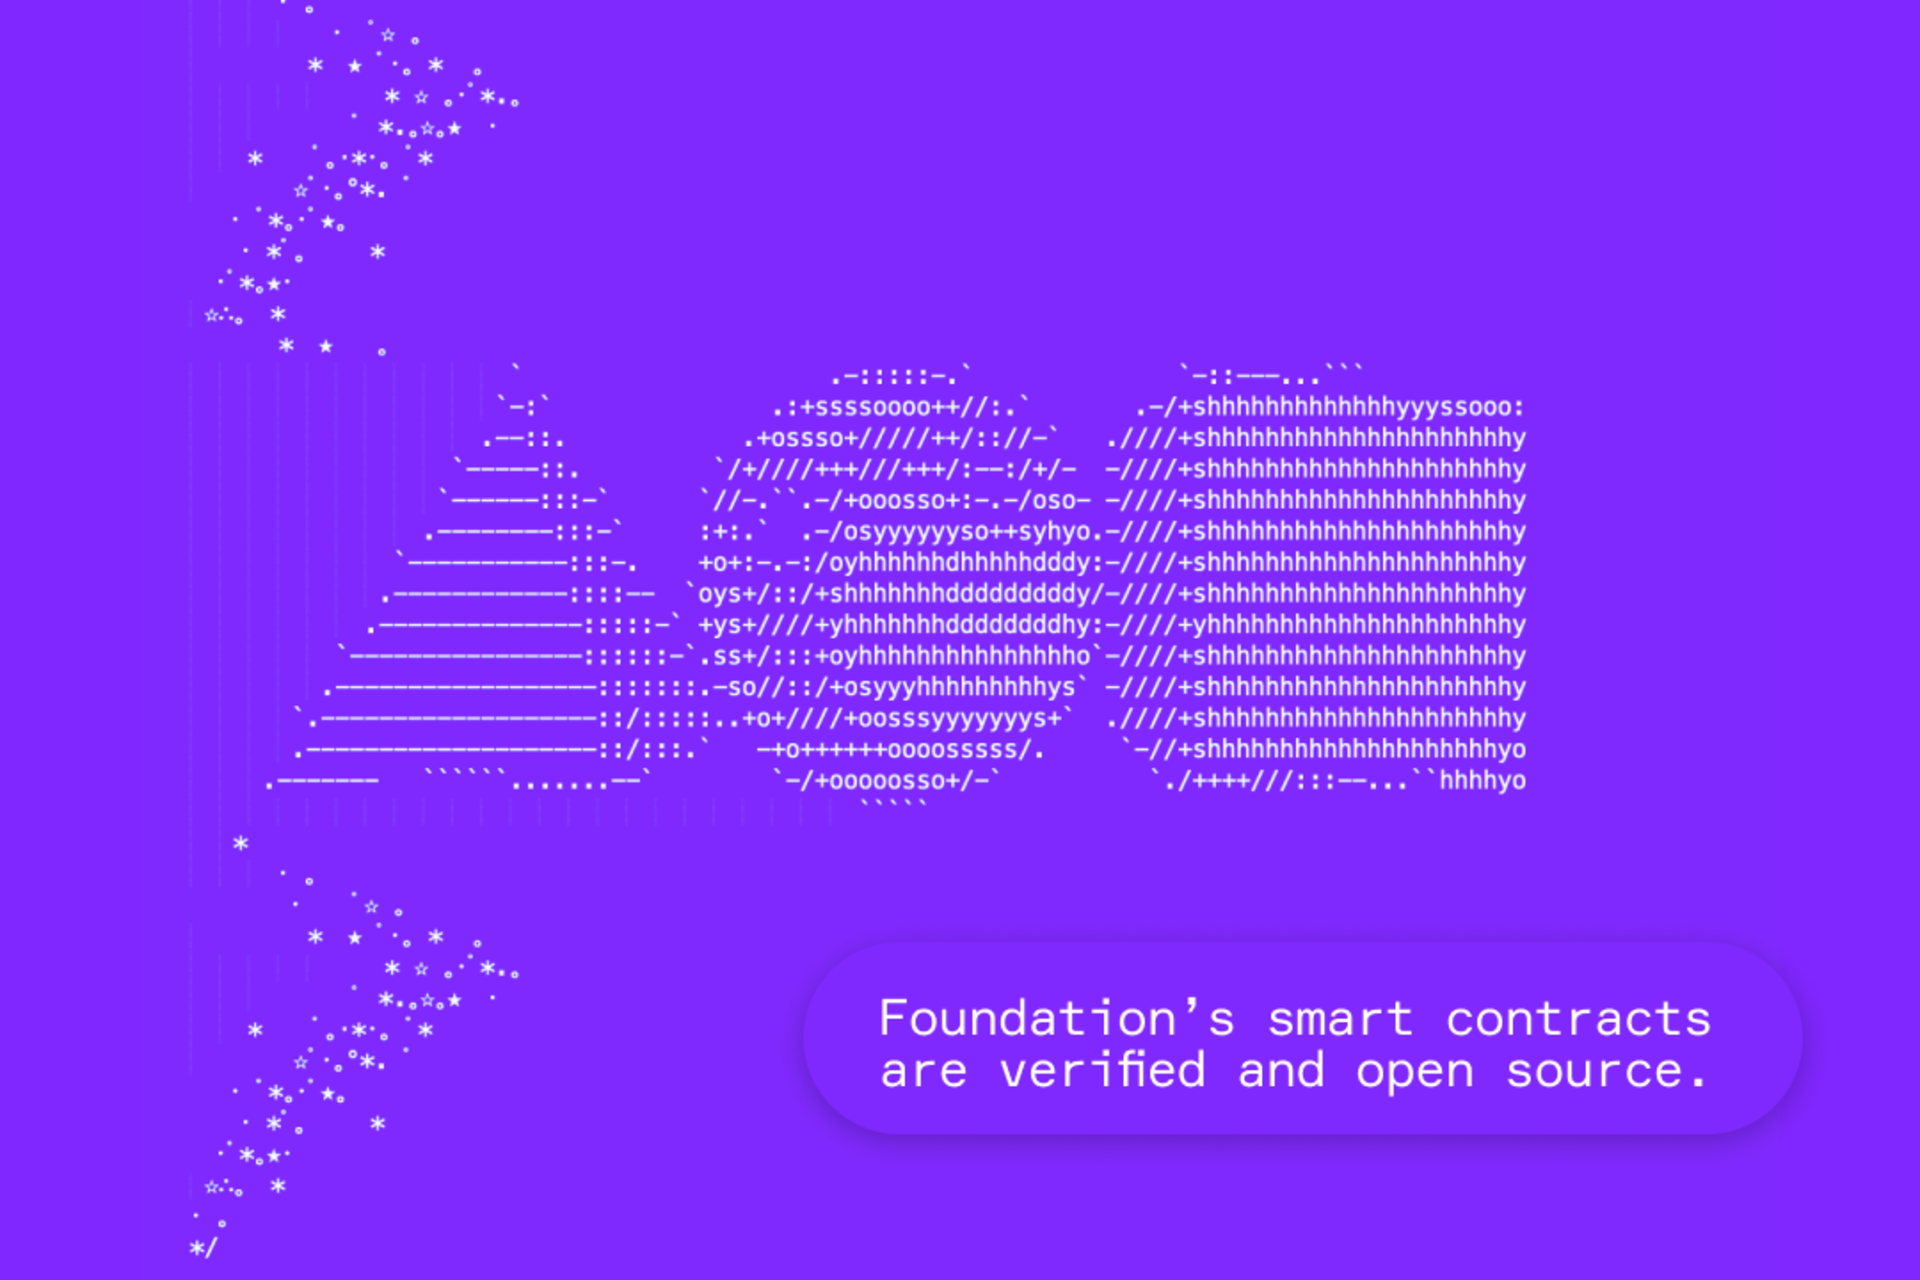 Foundation’s smart contracts are verified and open source.